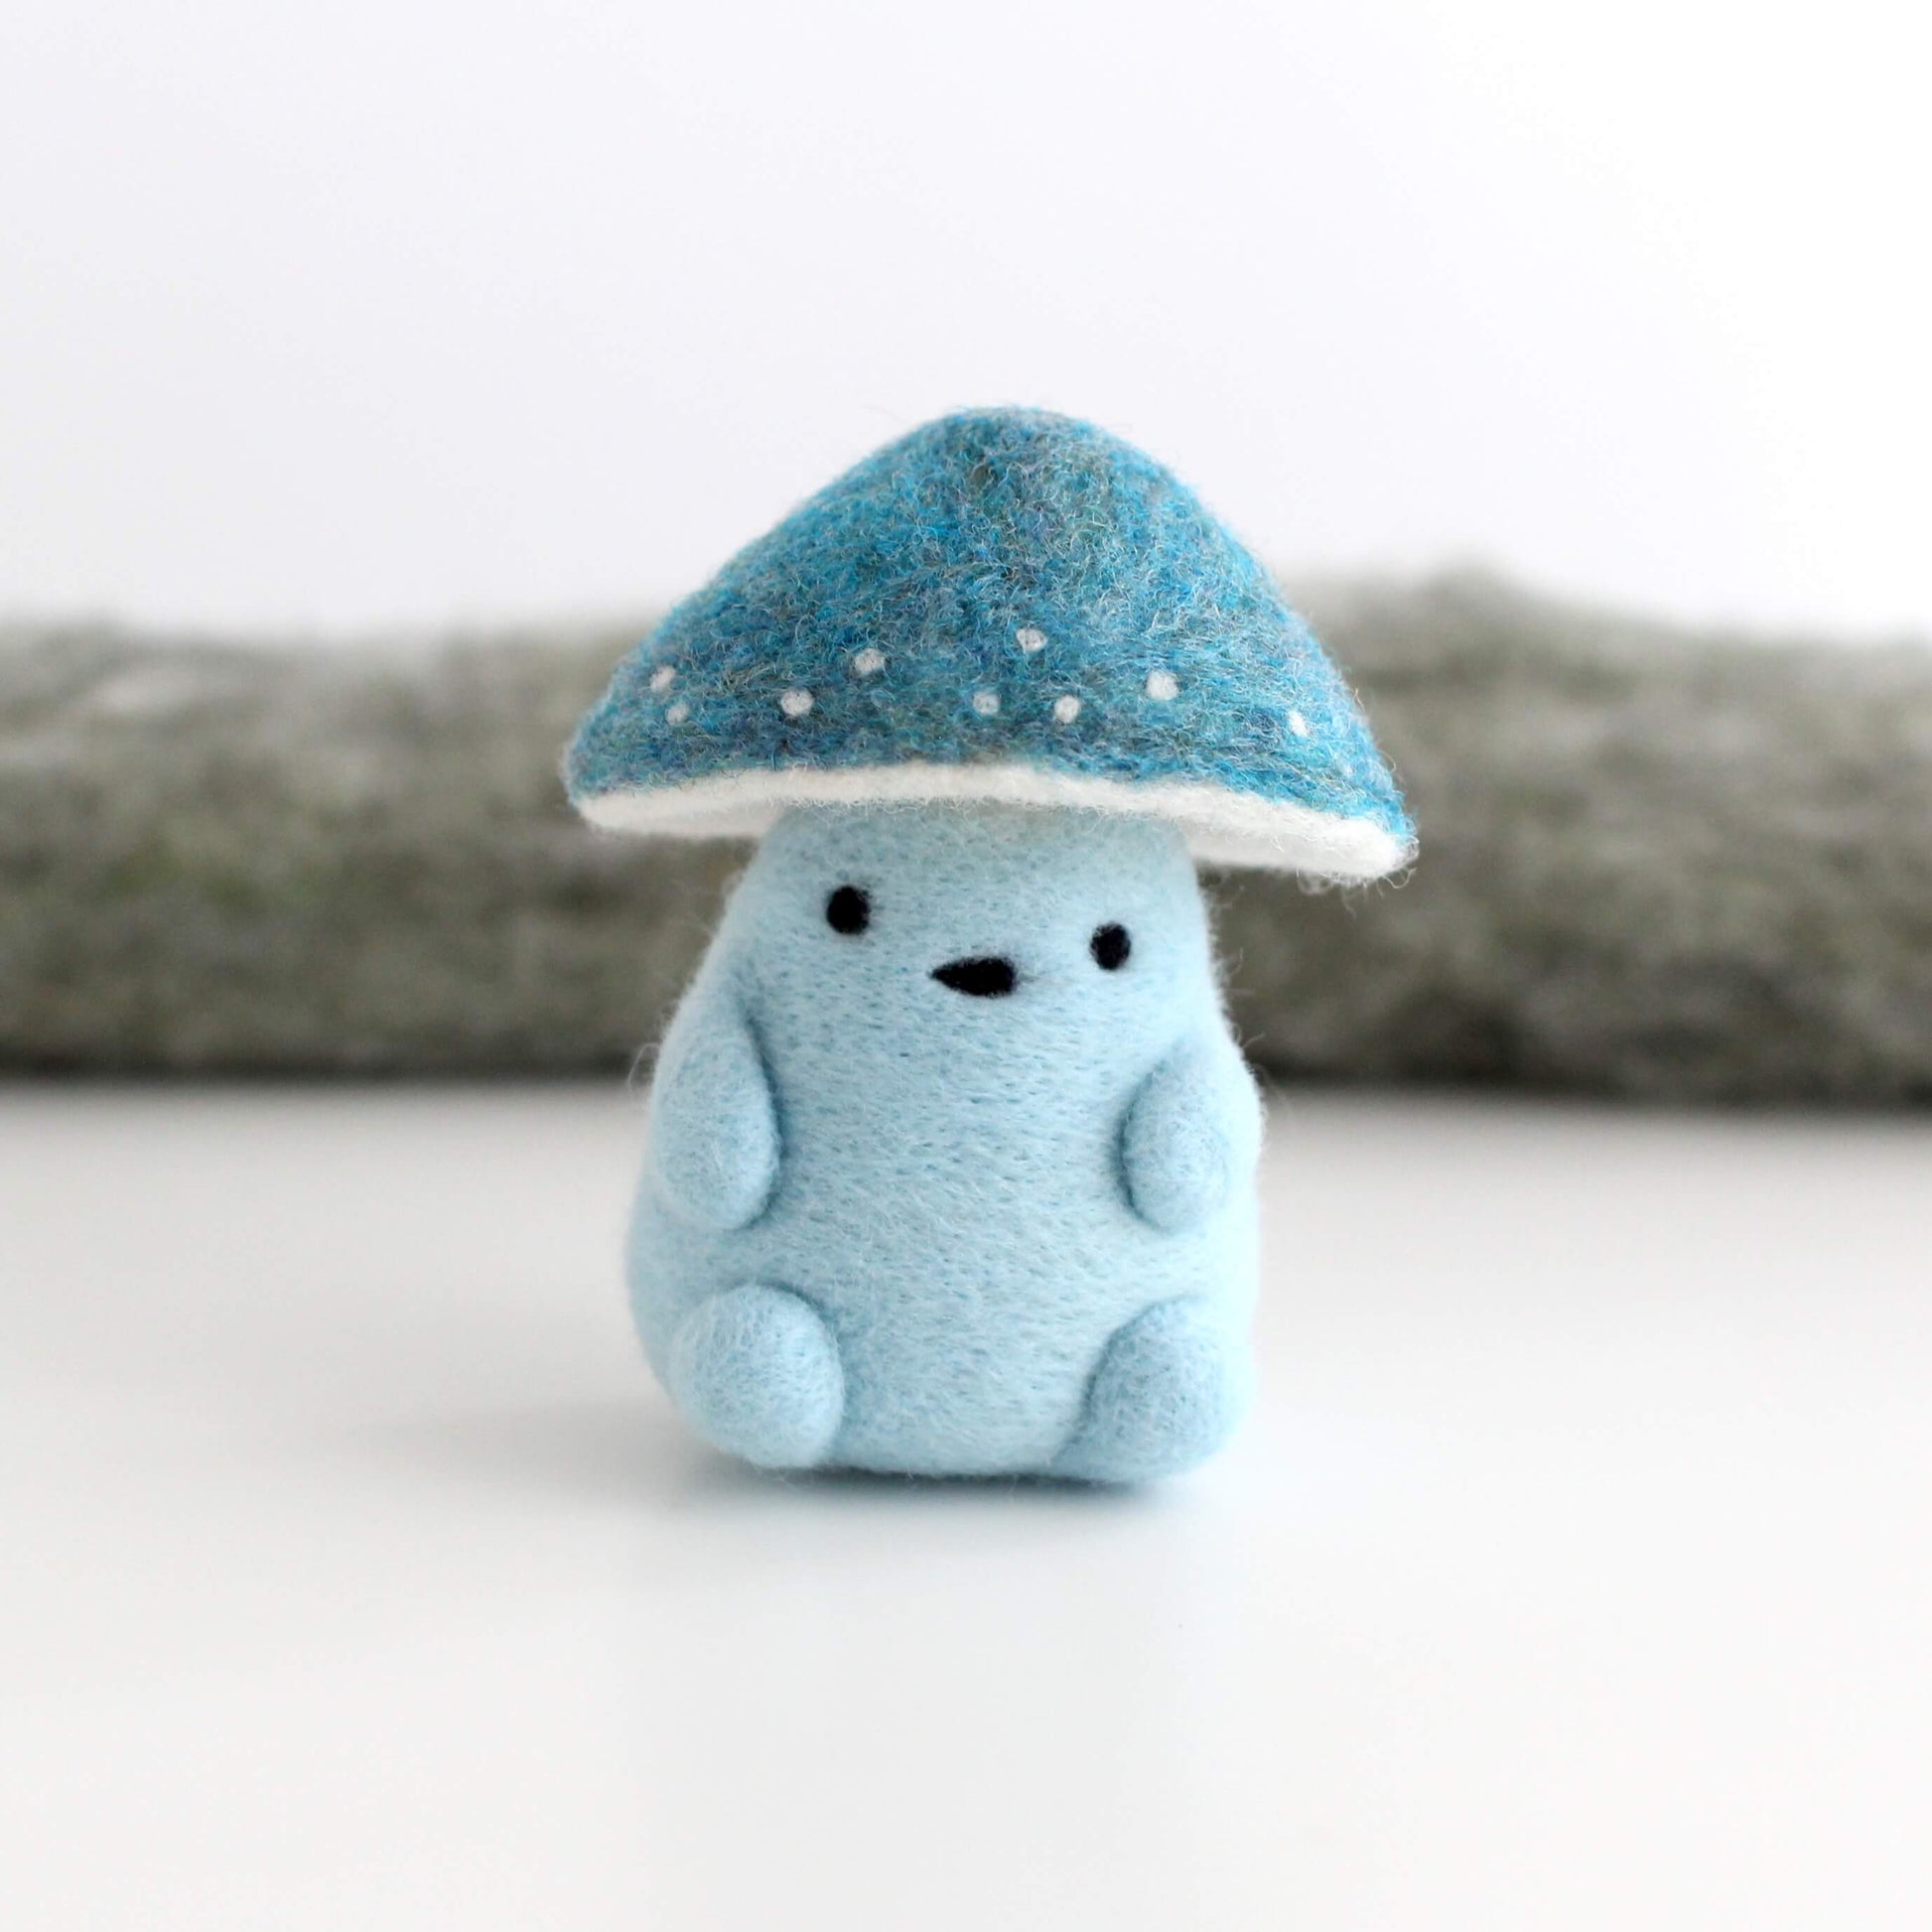 Needle Felted Blue Mushroom (Verdigris Agaric) by Wild Whimsy Woolies